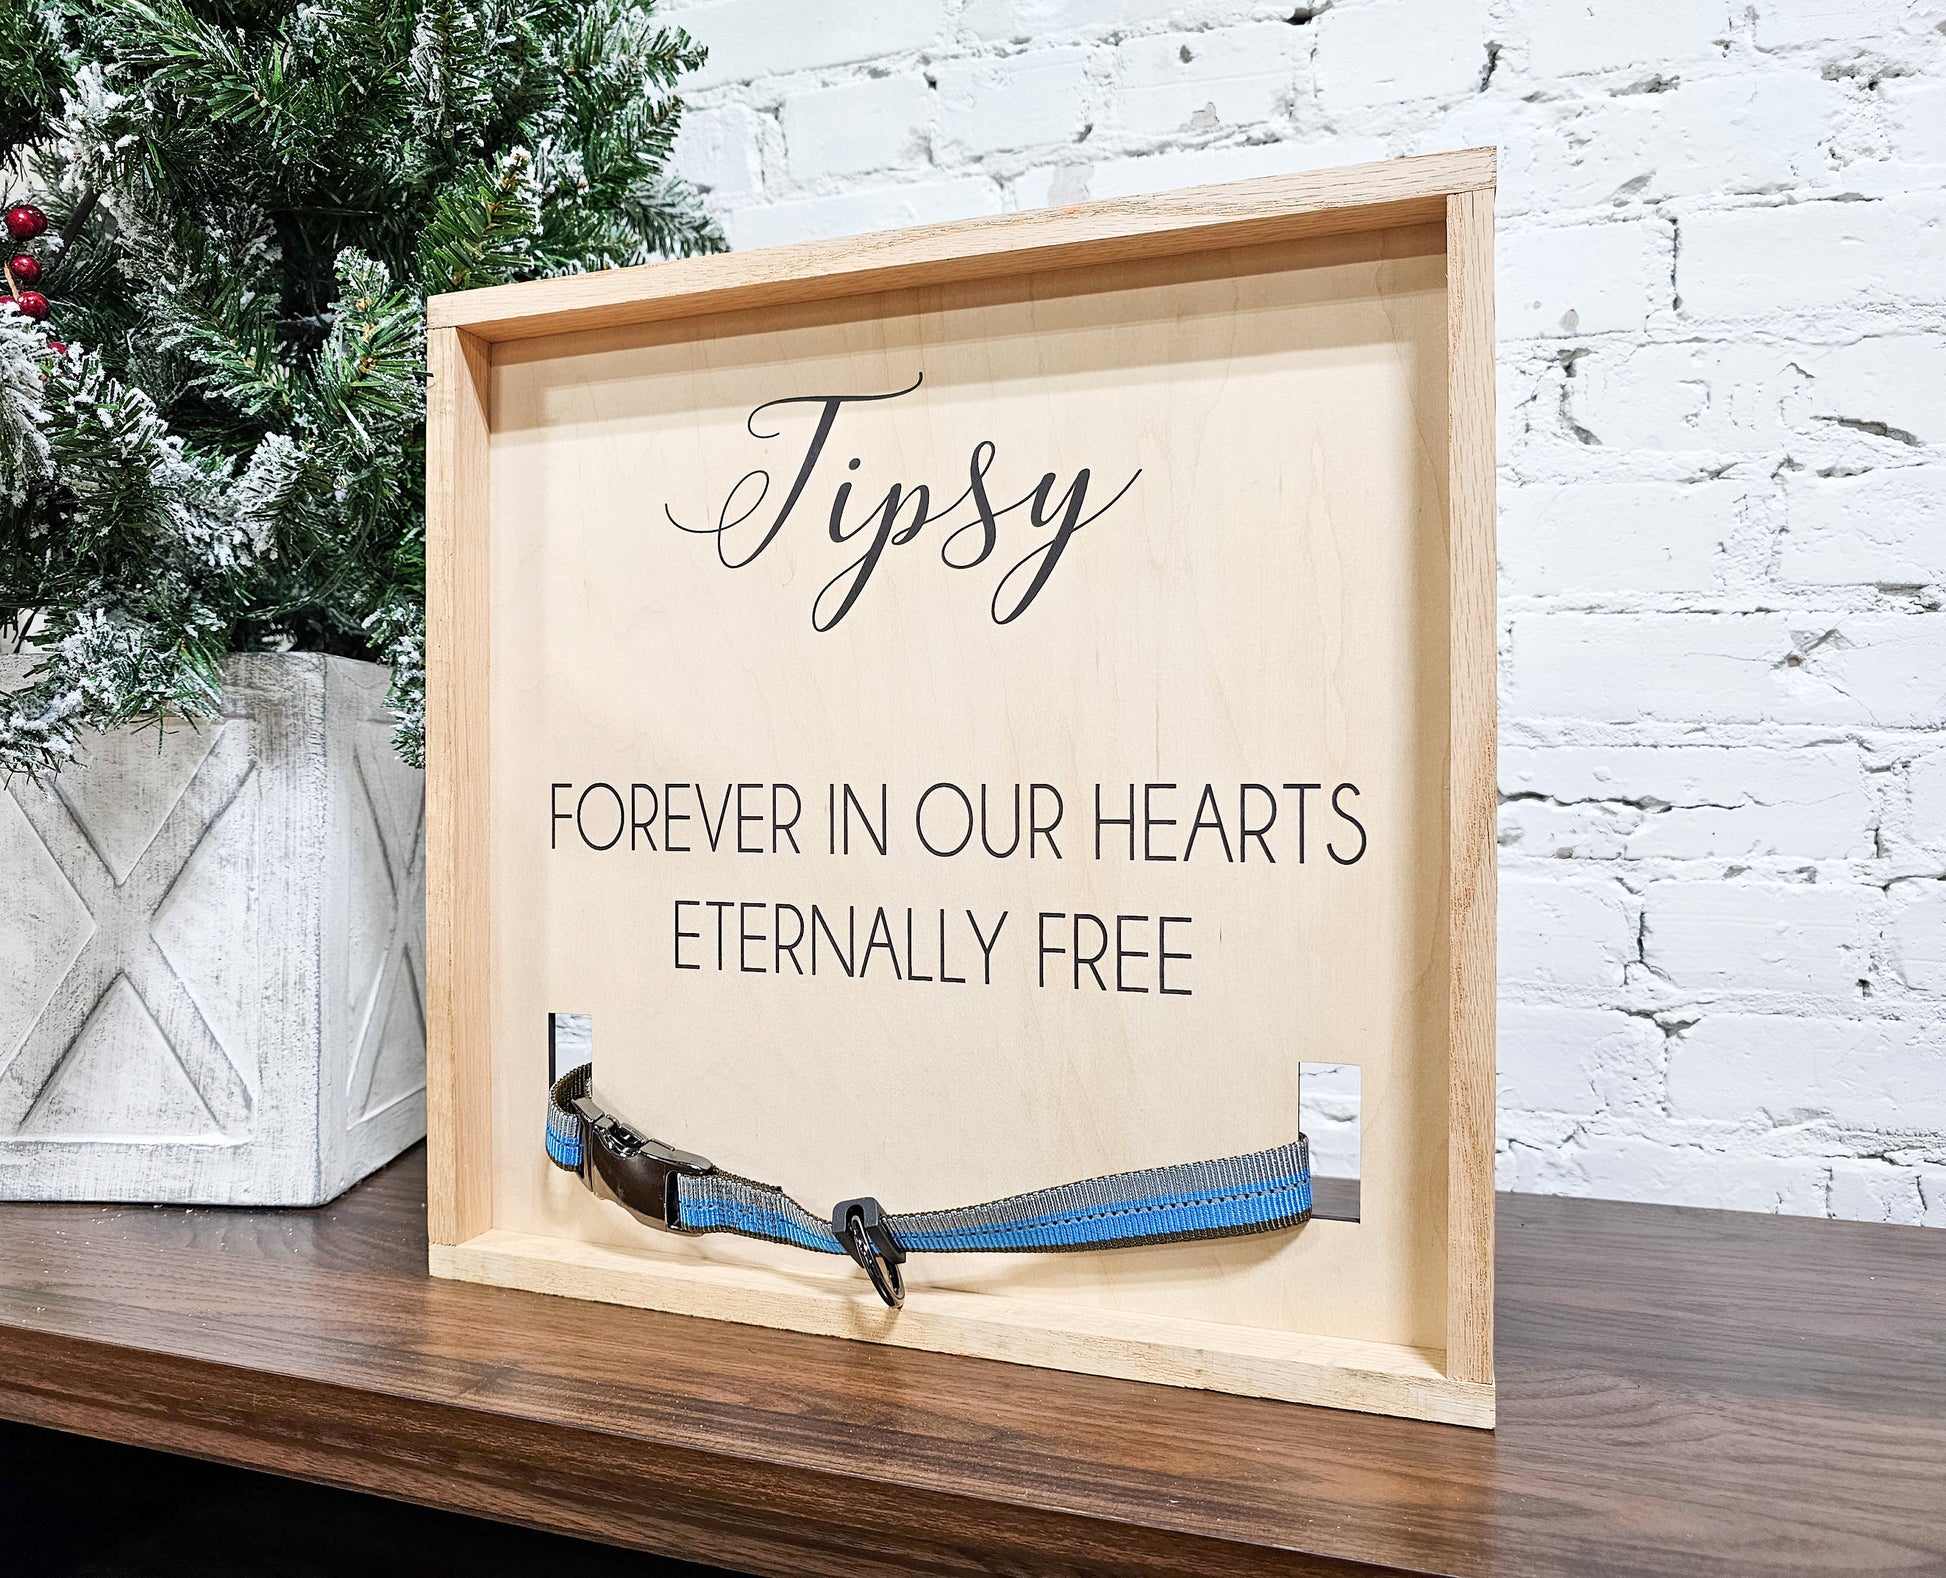 Pet Loss Memorial Sign, Personalized with Name & spot for collar, Sympathy Gift for Dogs, Cats, Keepsake Framed Wooden Wall Sign